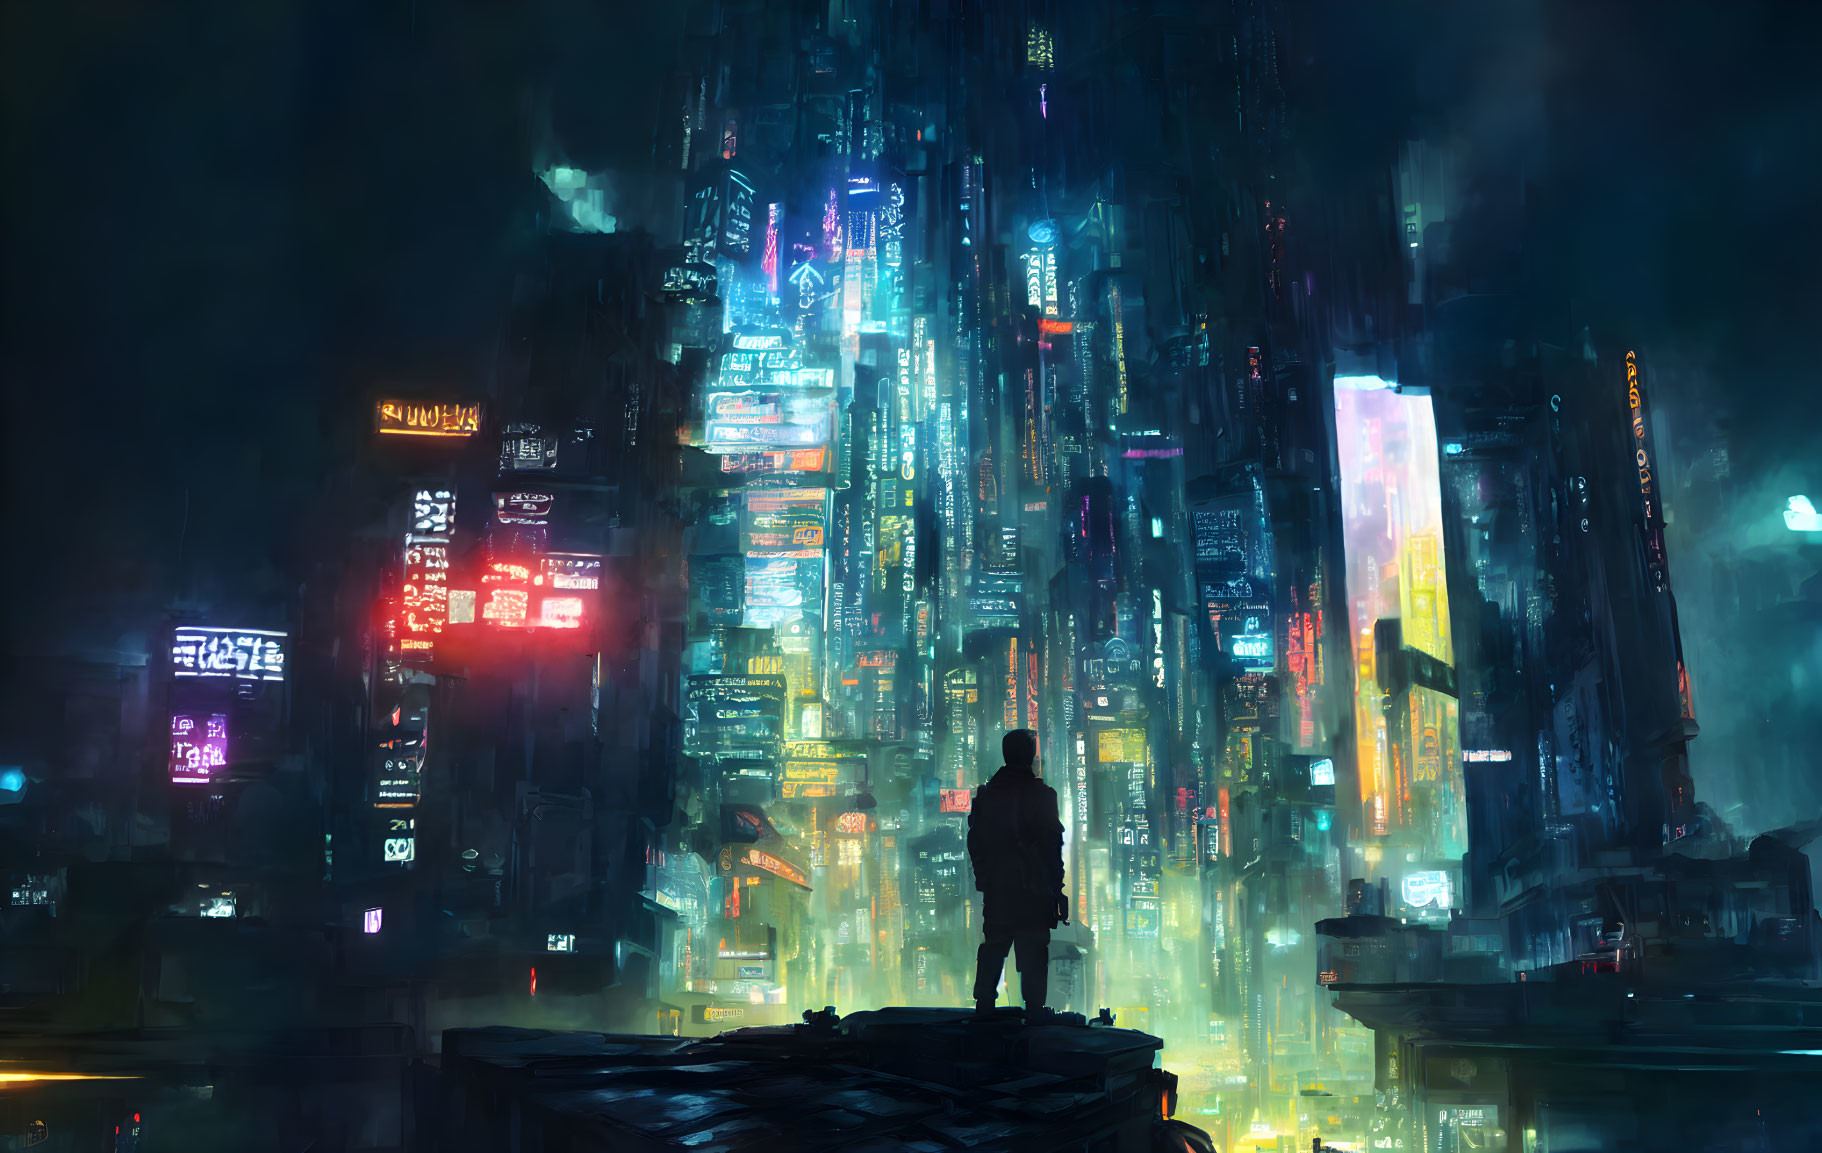 Solitary figure in front of neon-lit futuristic cityscape at night